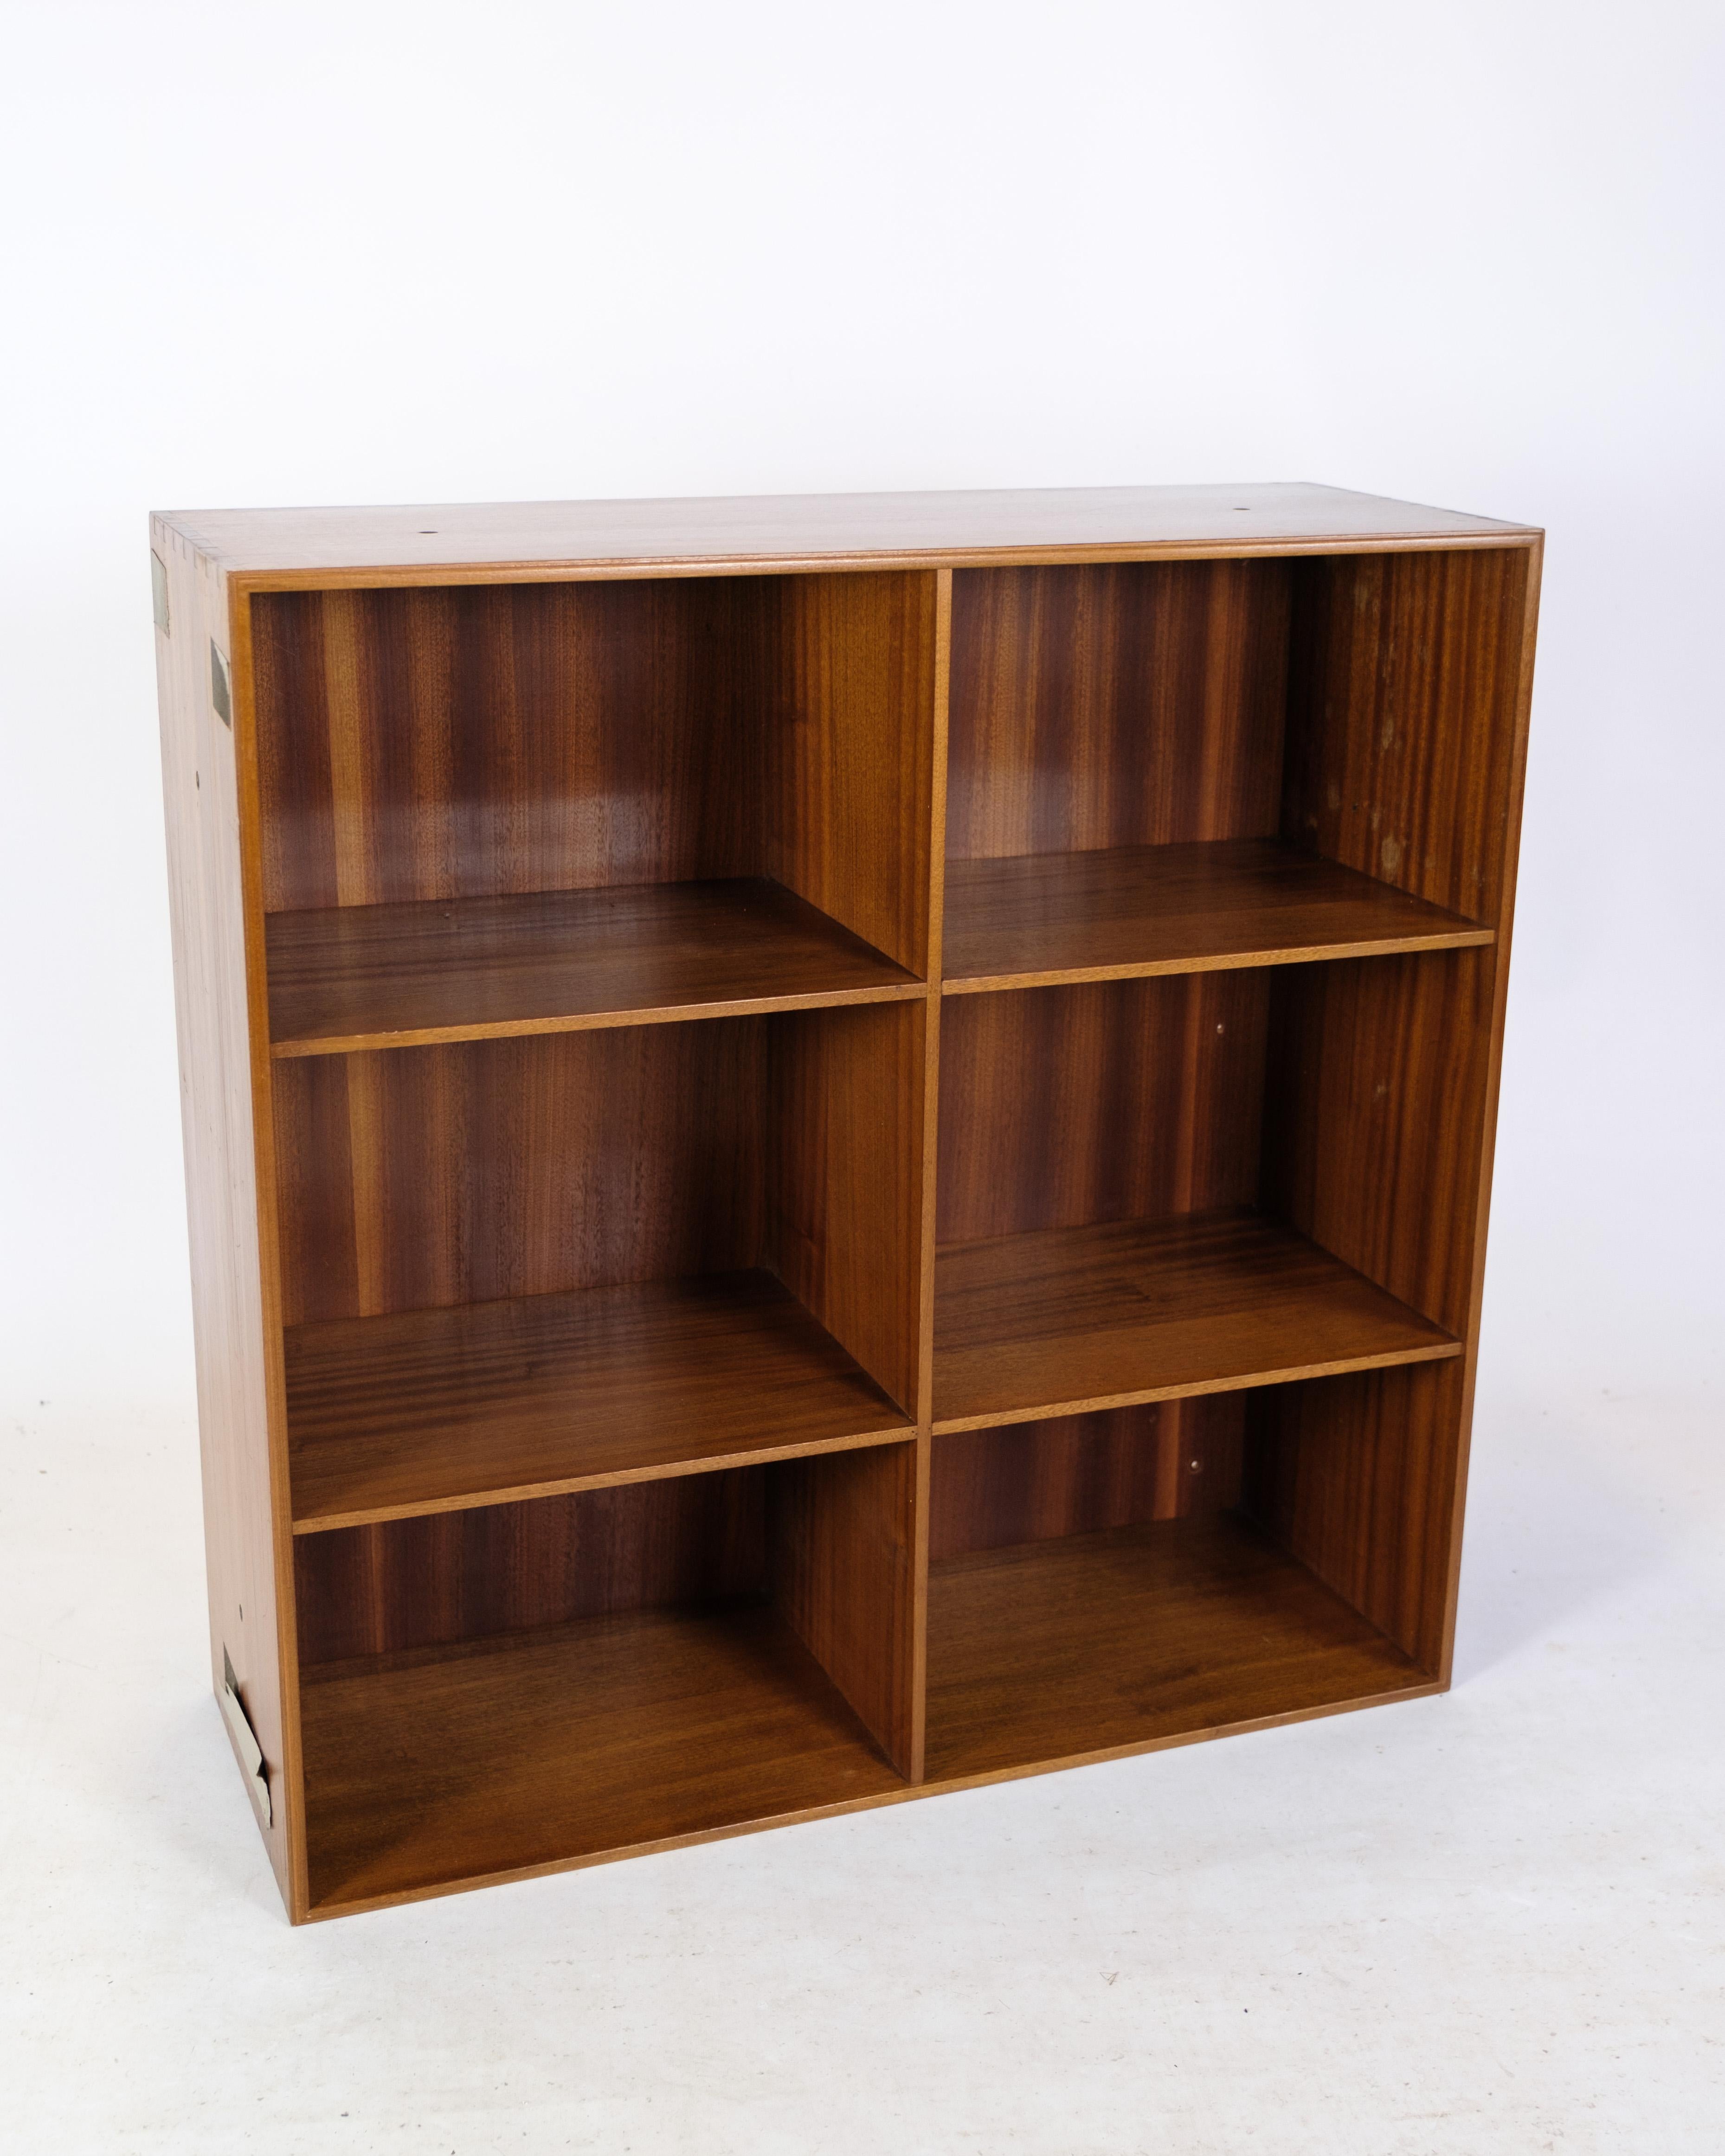 Mid-20th Century Bookcase in Light Mahogany of Mogens Koch and Rud Rasmussen from the 1960s For Sale